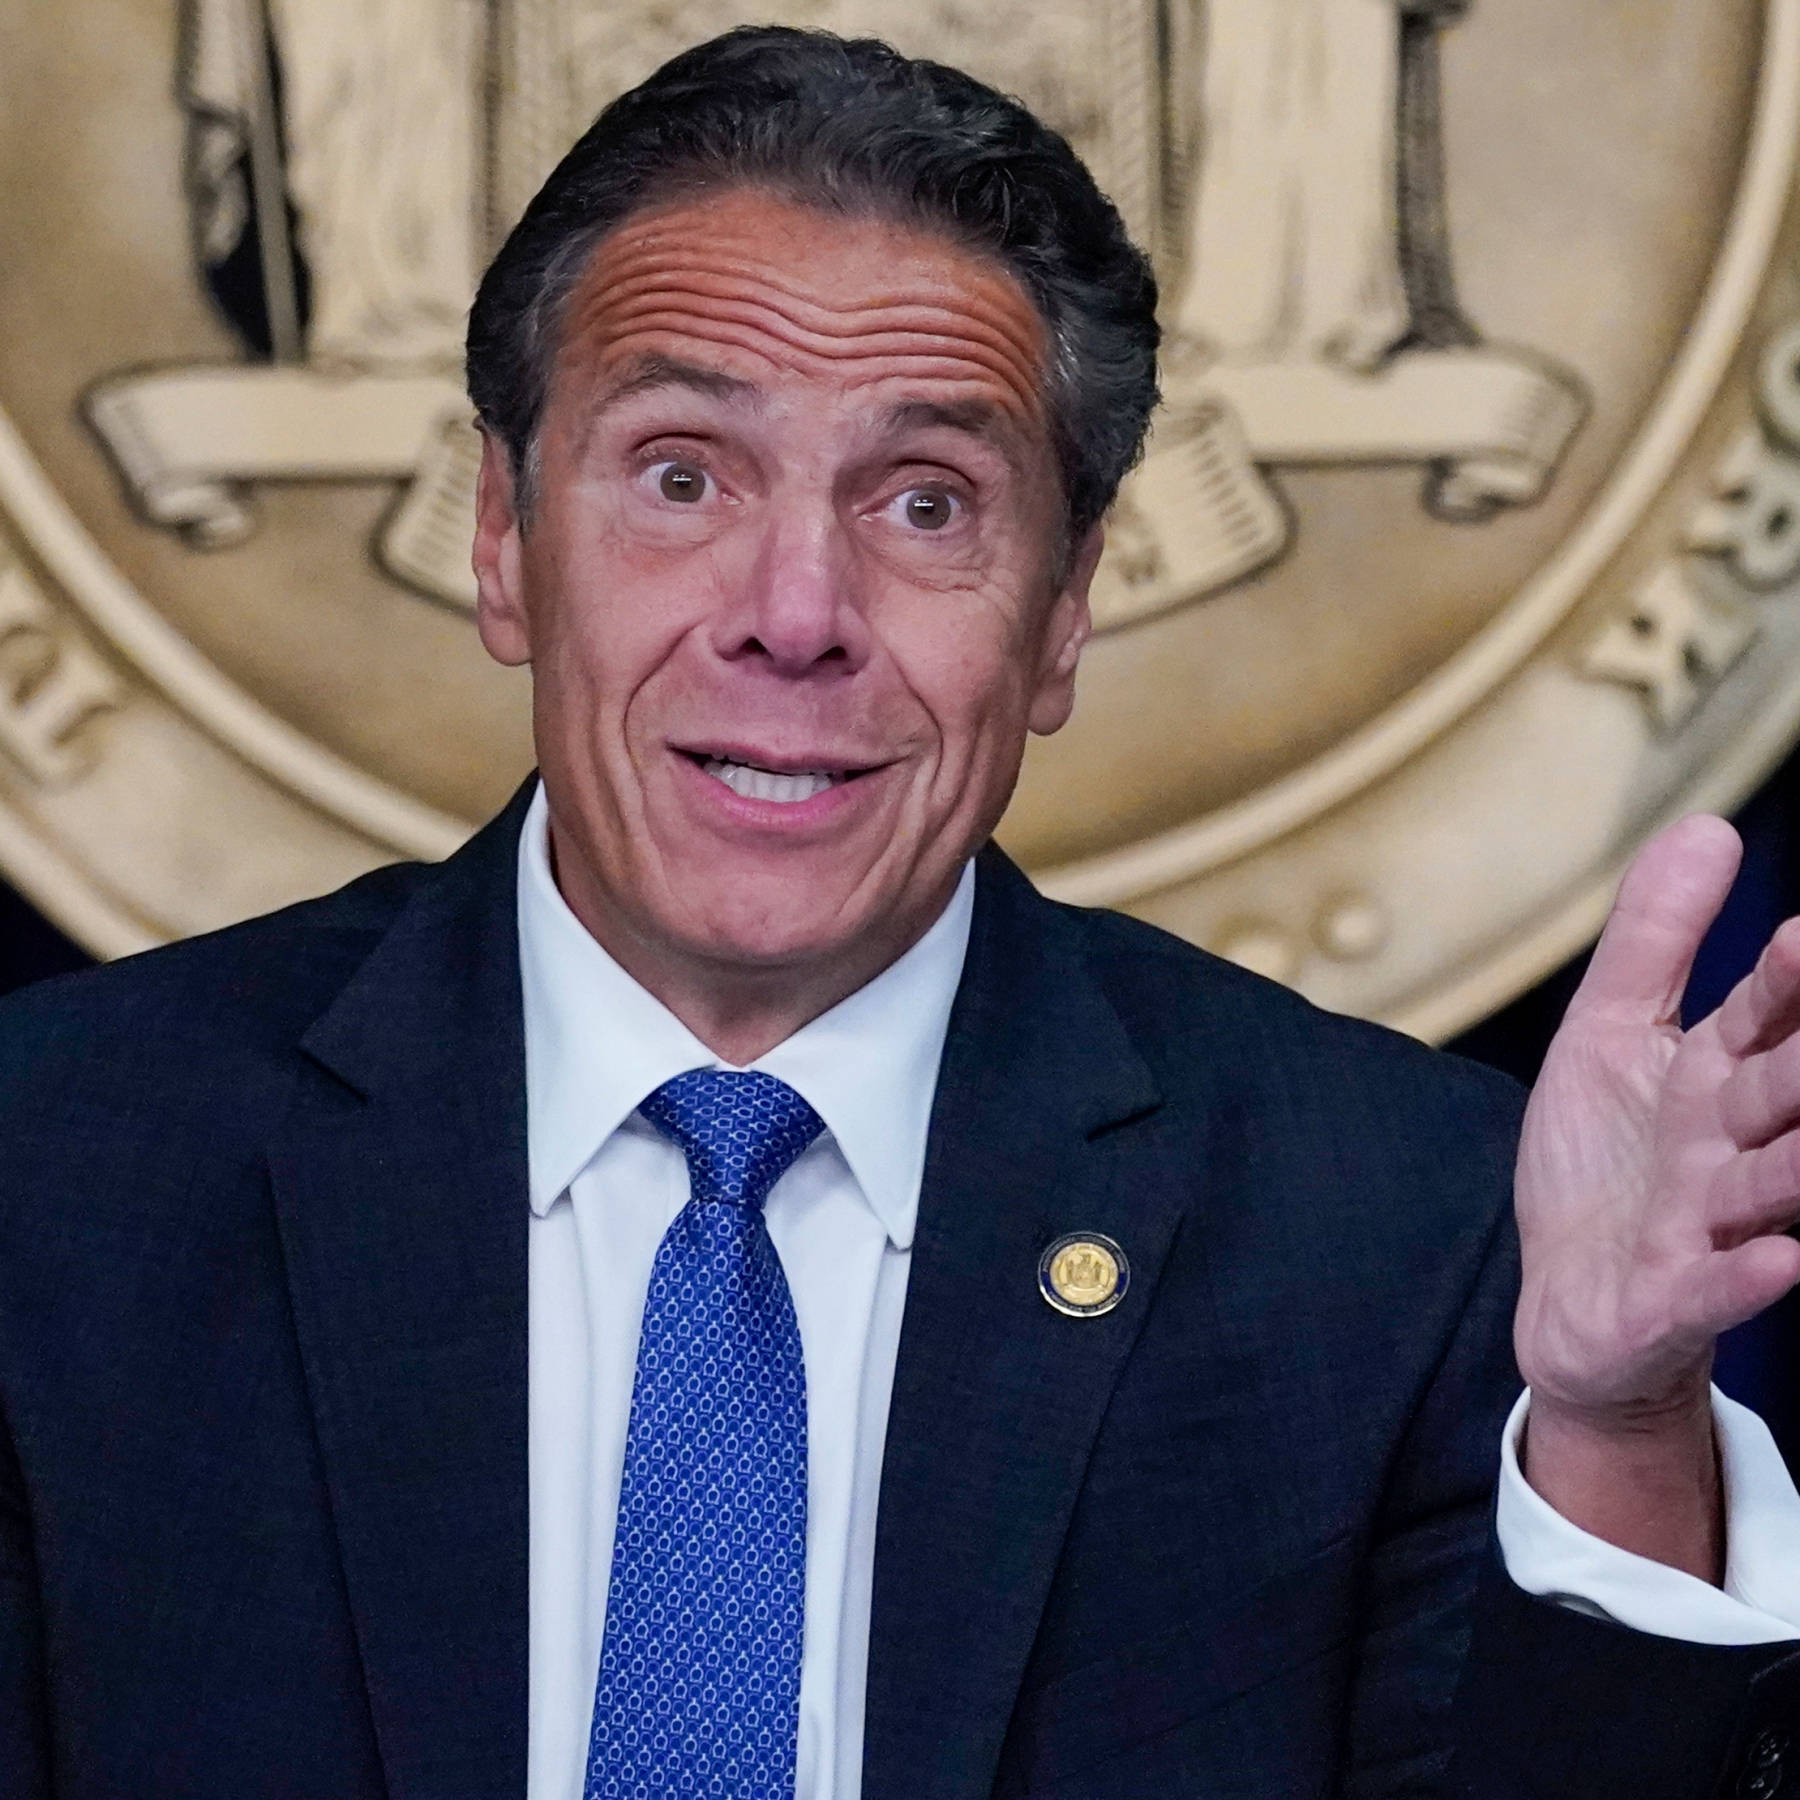 Andrew Cuomo's Forehead Wrinkles Wallpaper